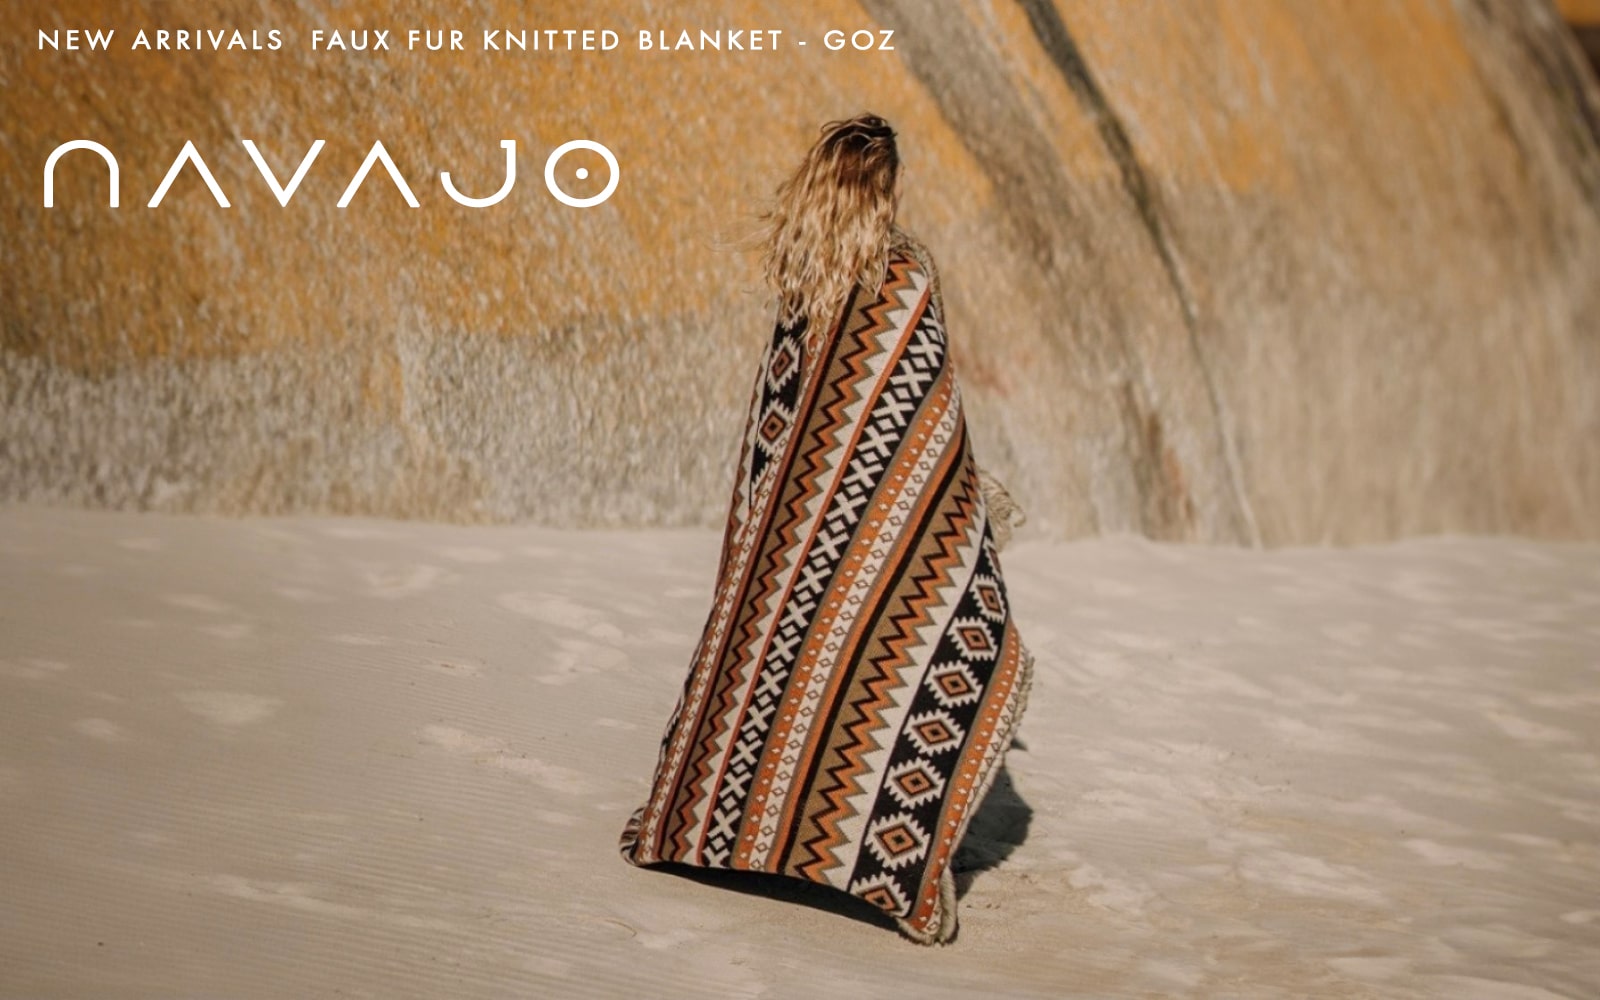 Discover the Majesty of the Dunes with the Navajo Faux Fur Knitted Blanket